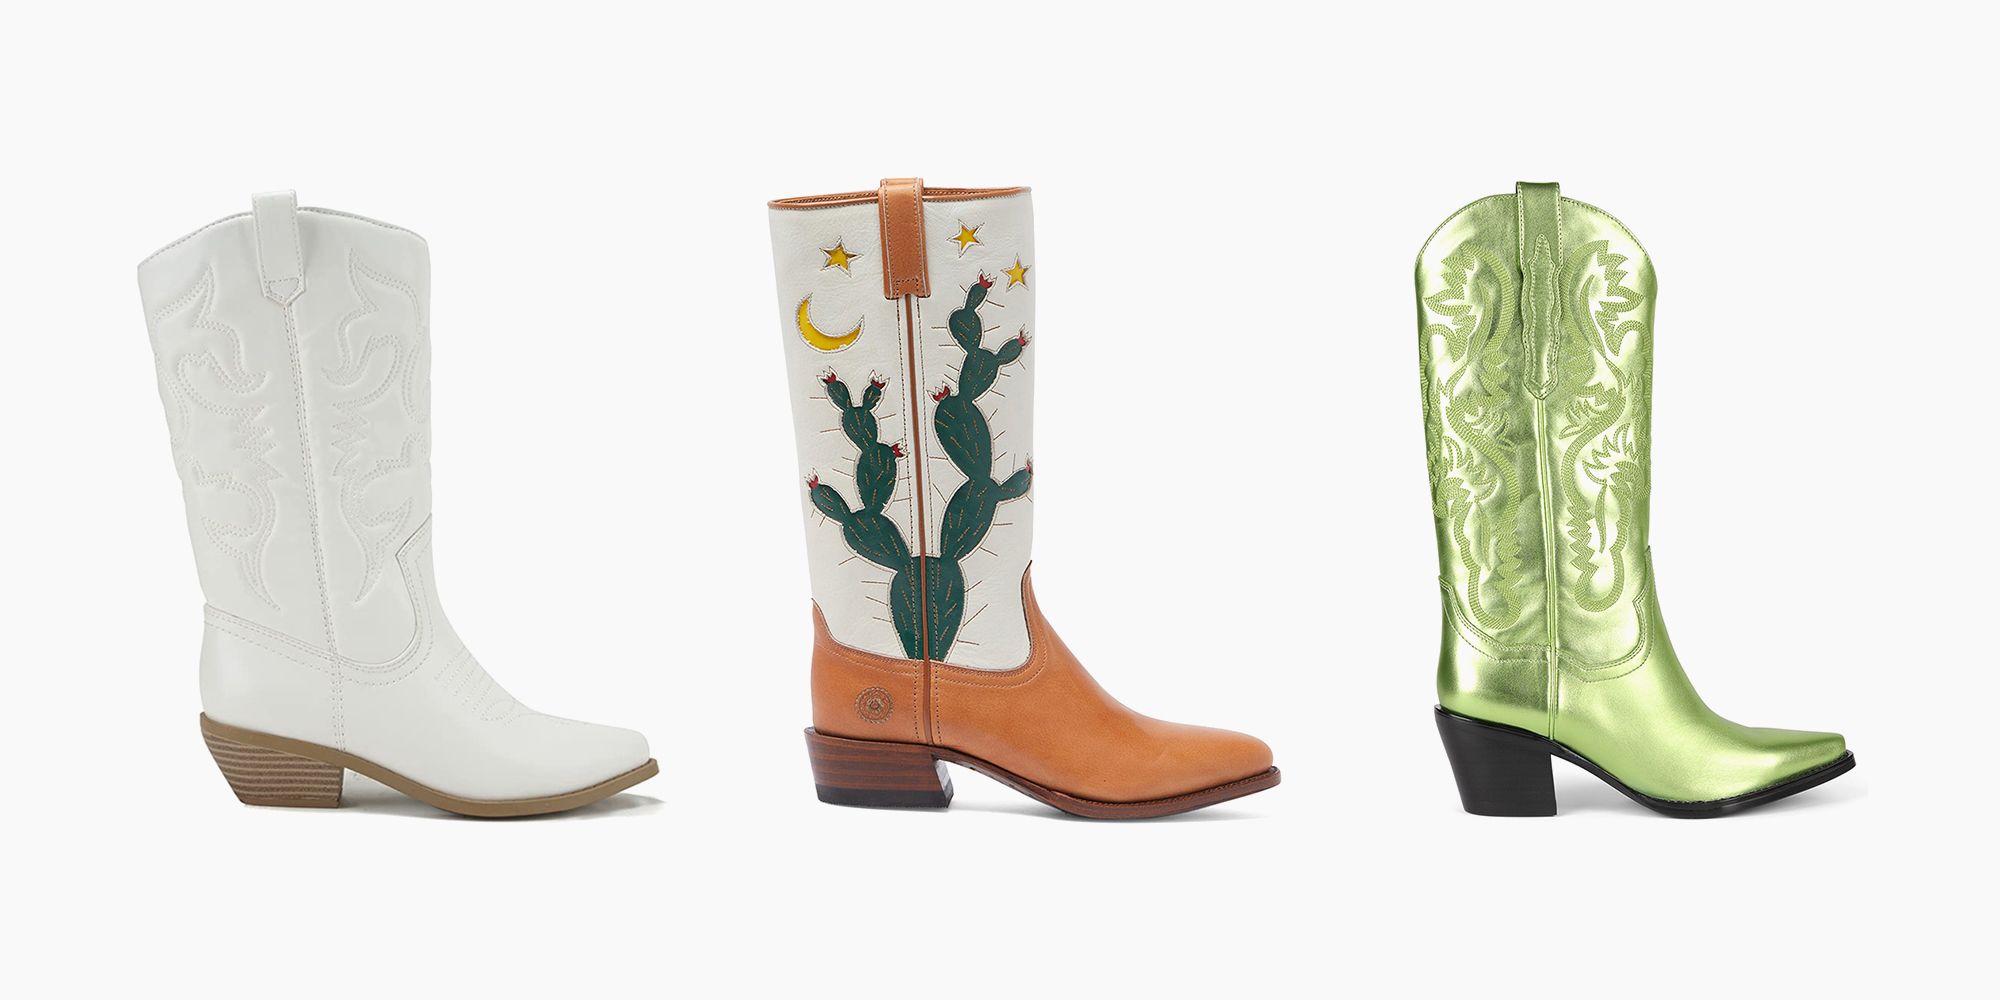 17 Perfect Pairs of Cowboy Boots That'll Put Some Pep in Your Two-Step